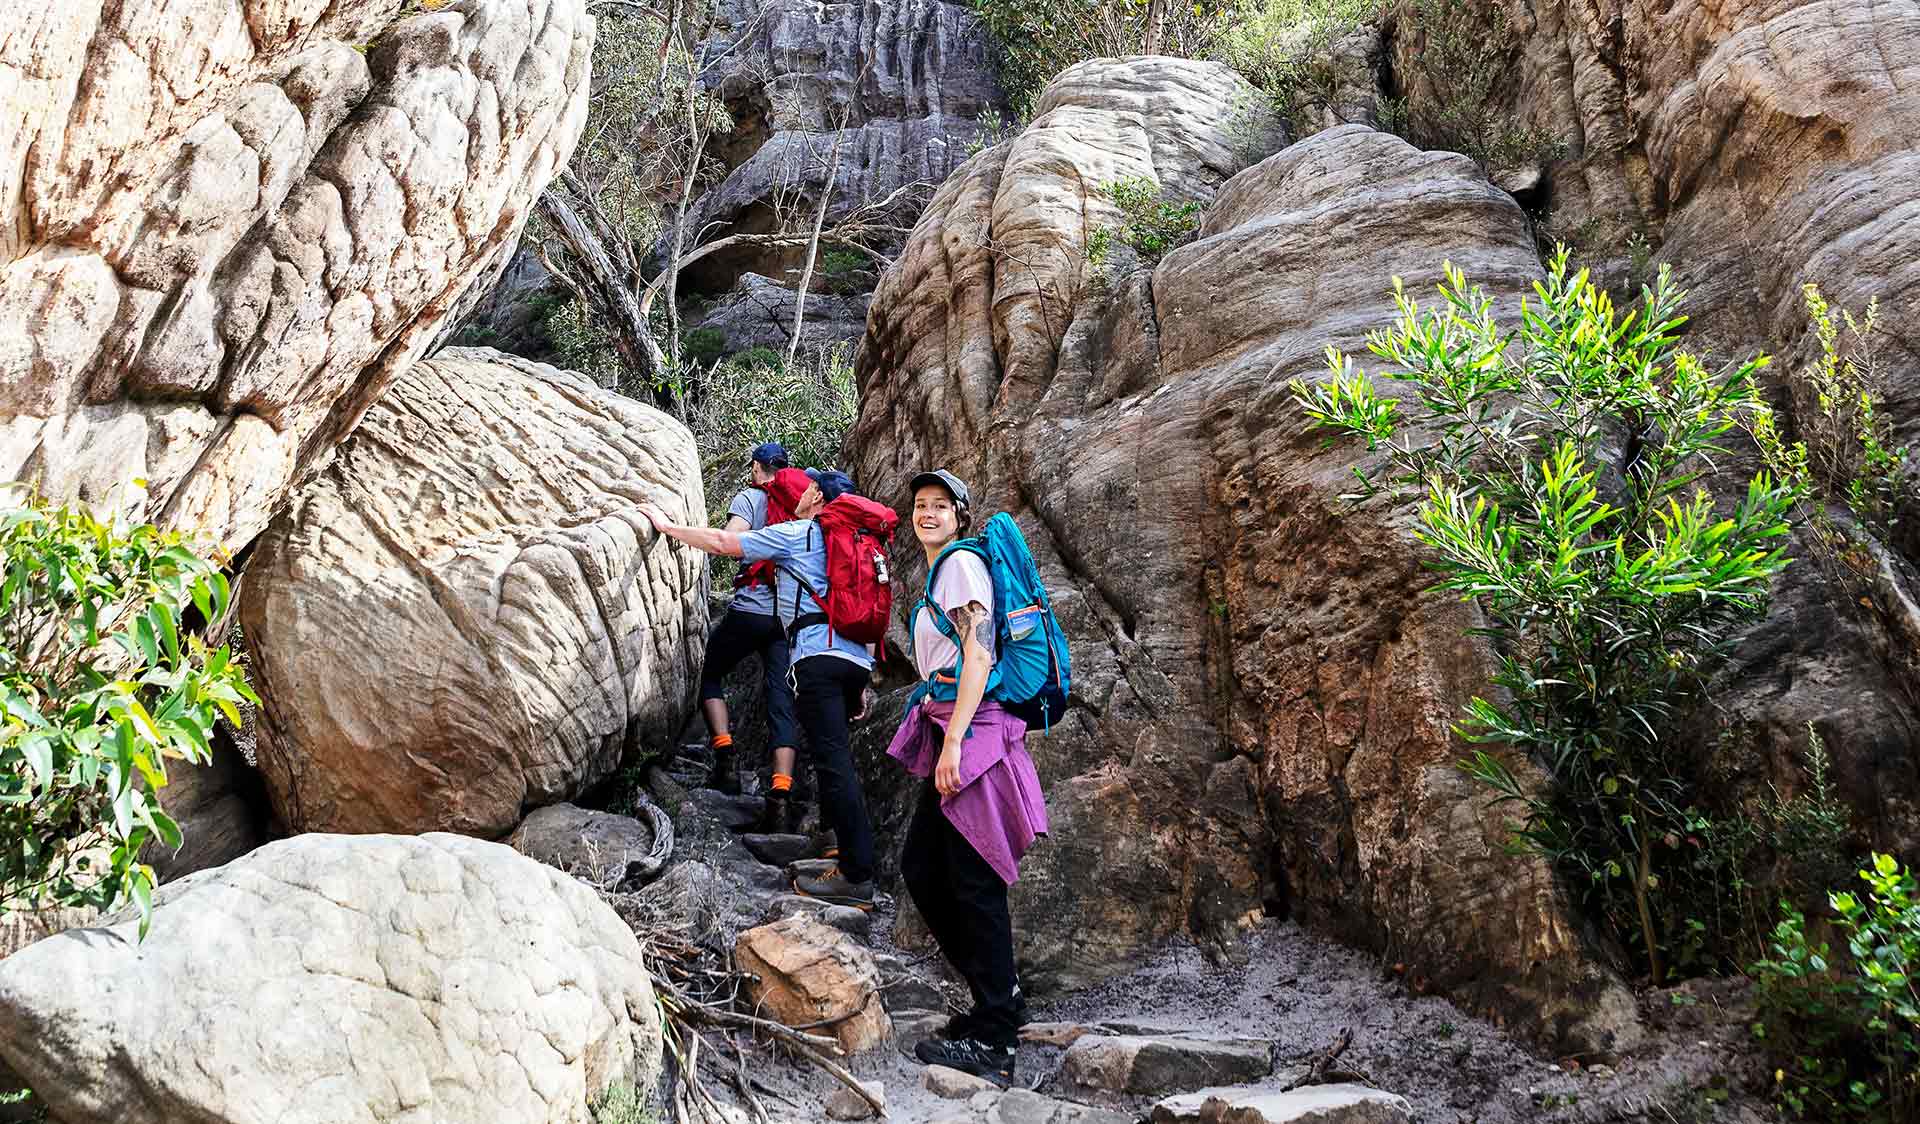 A group of three friends walk through the rocky ravines of the Northern Grampians.